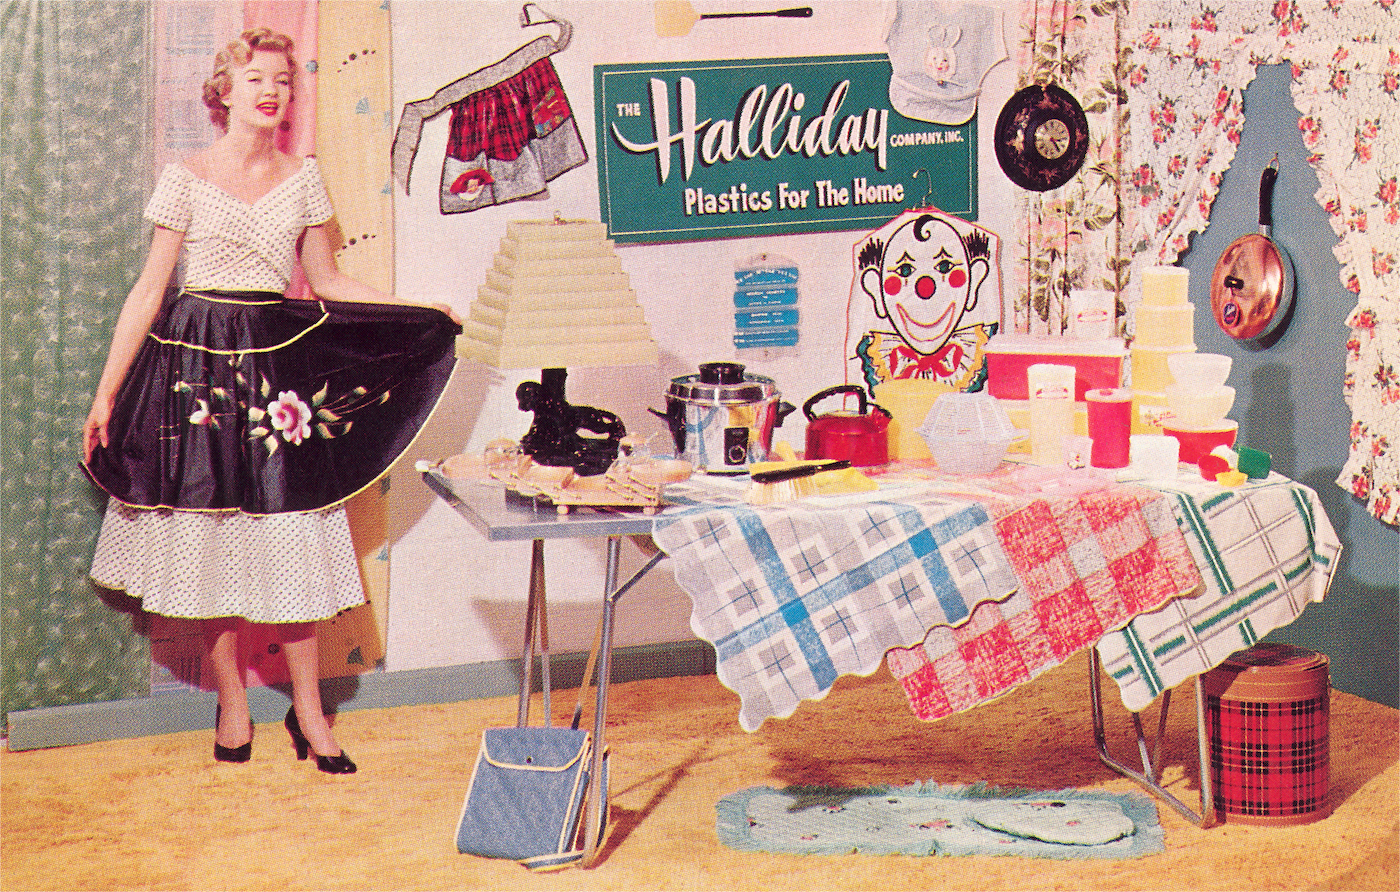 An old-fashioned display of household items like containers, tablecloths, and signs made from plastic.